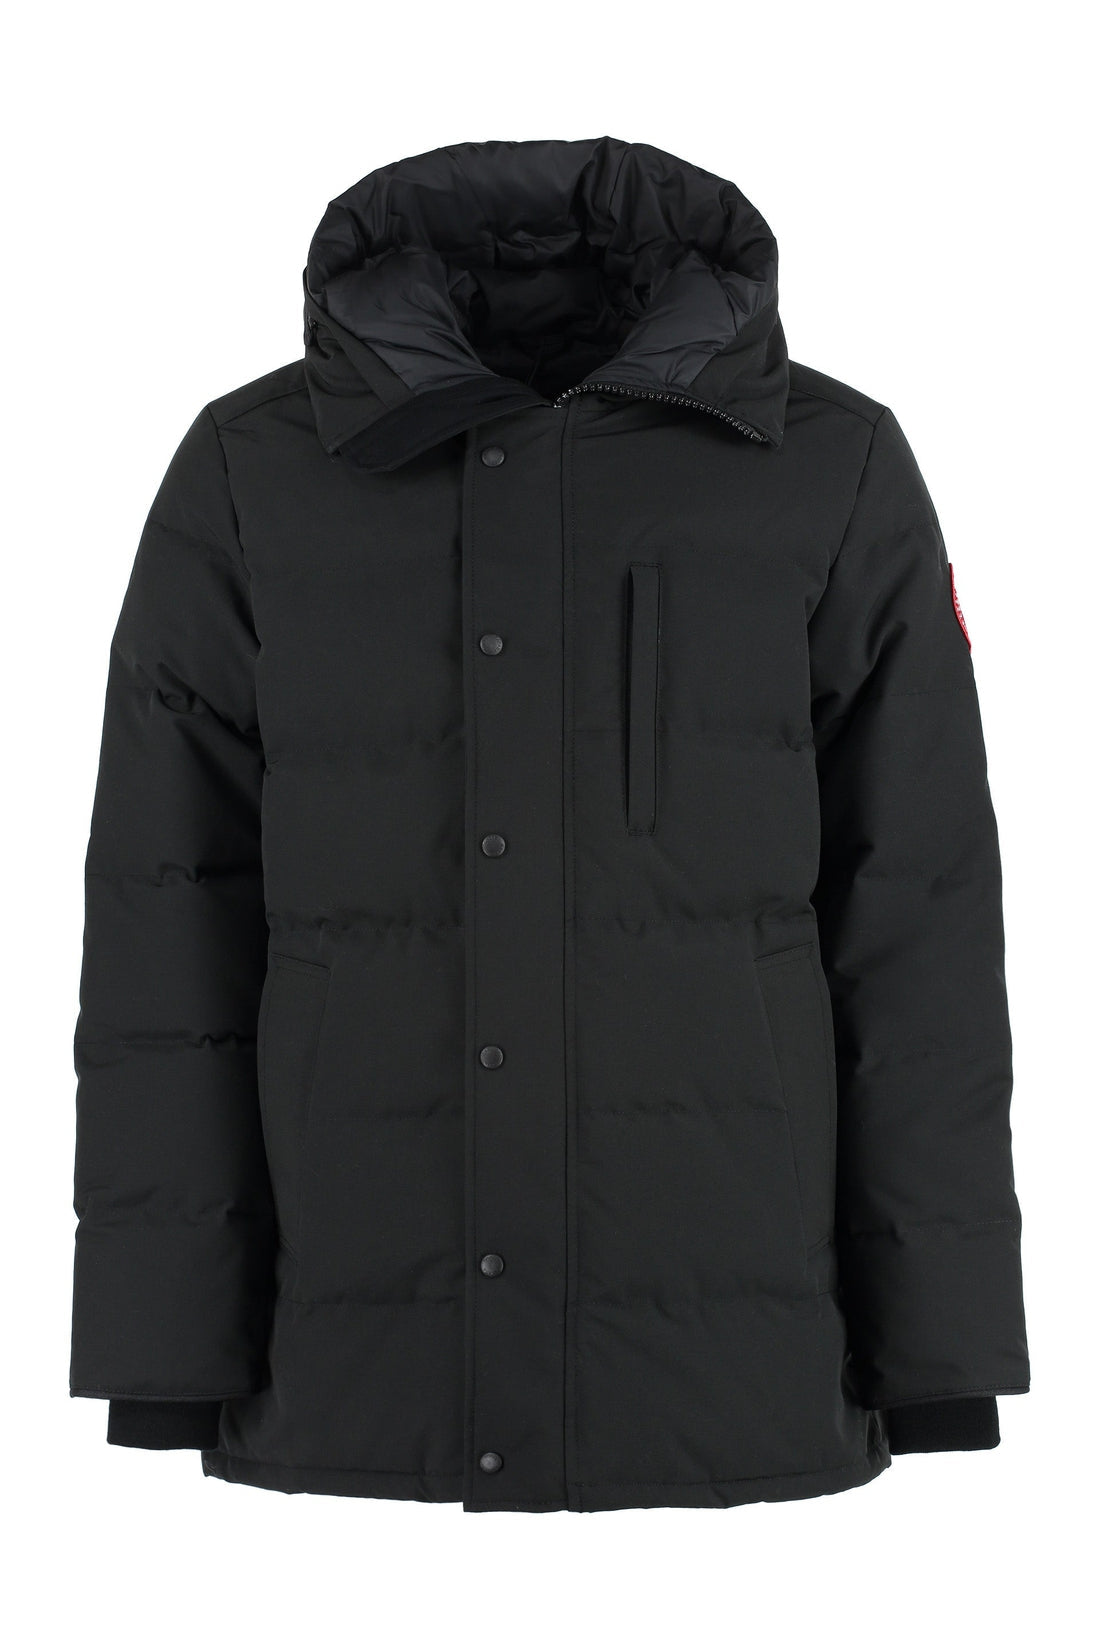 Canada Goose-OUTLET-SALE-Carson hooded parka-ARCHIVIST